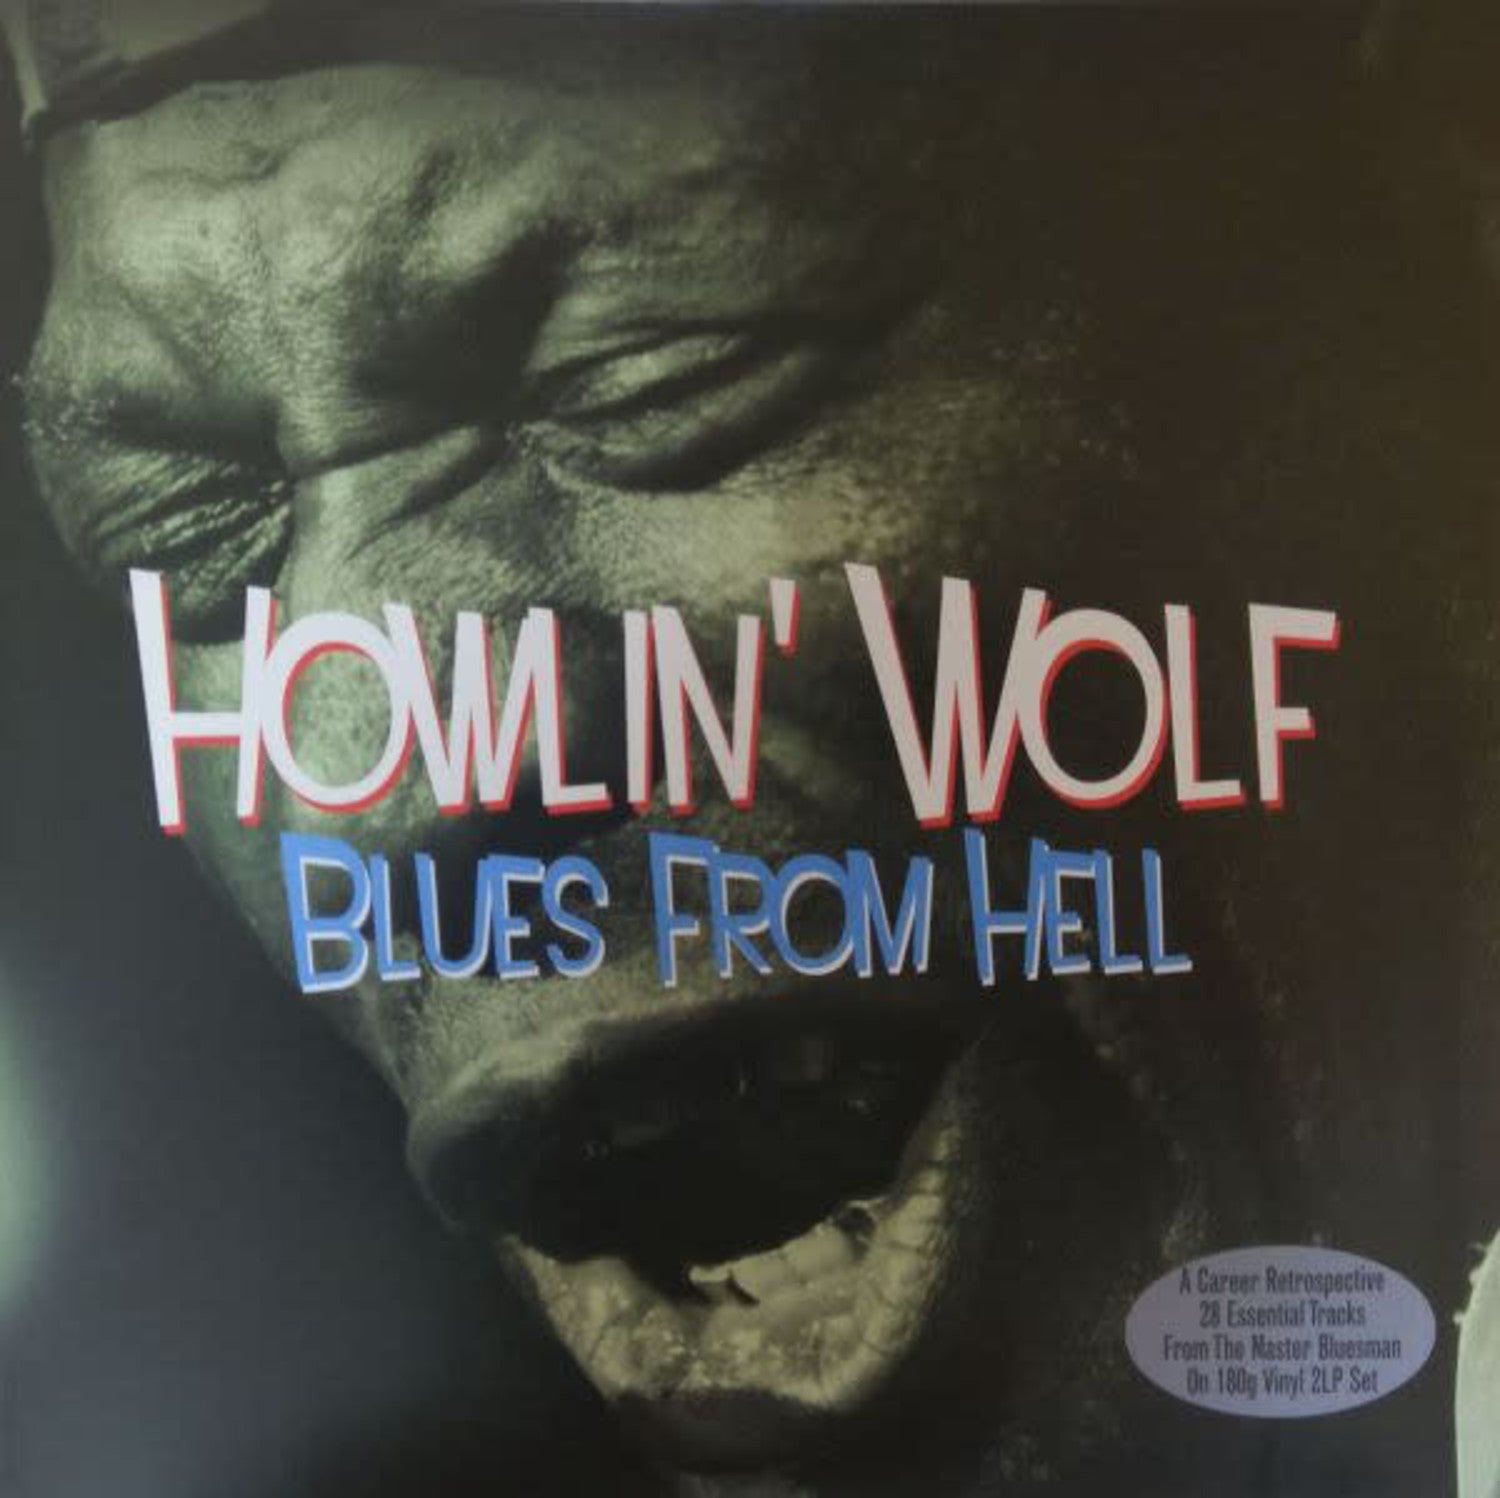 Howlin' Wolf - Blues From Hell (Vinyl 2LP)